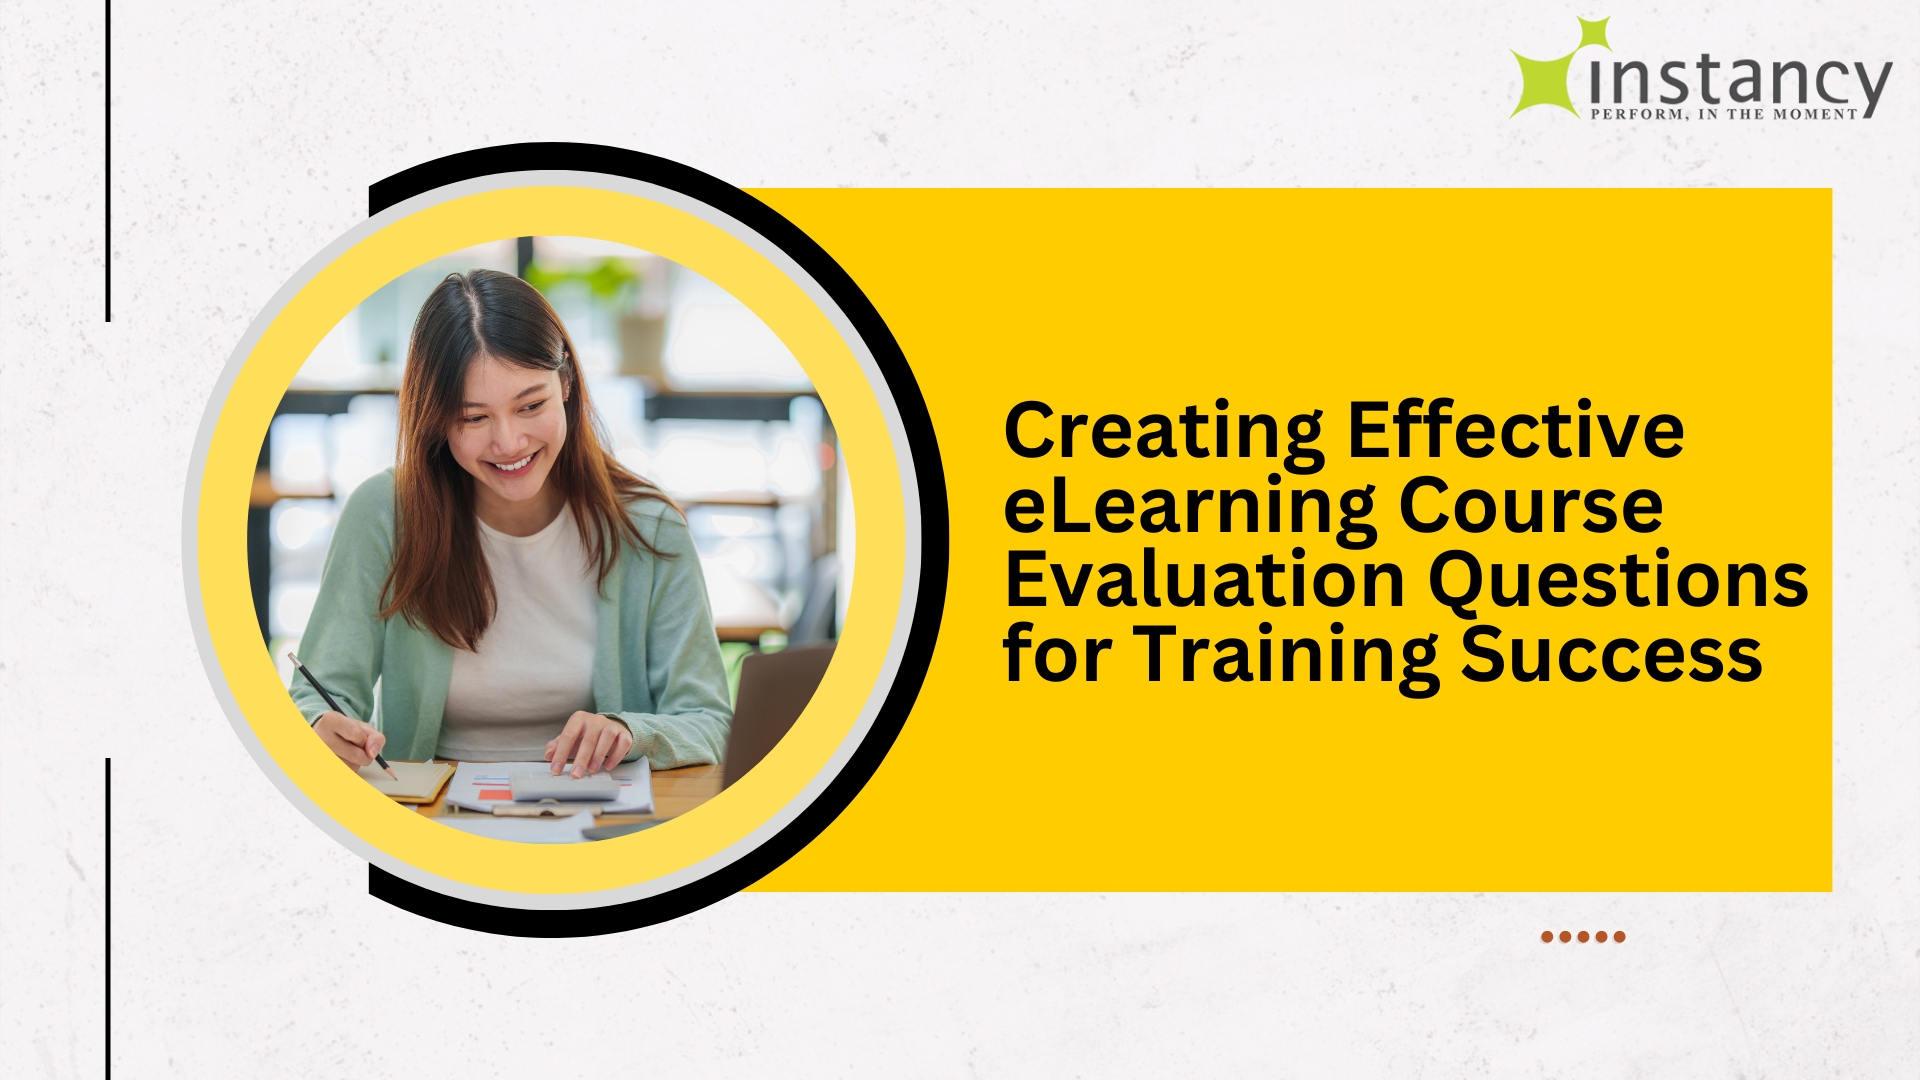 eLearning Course Evaluation